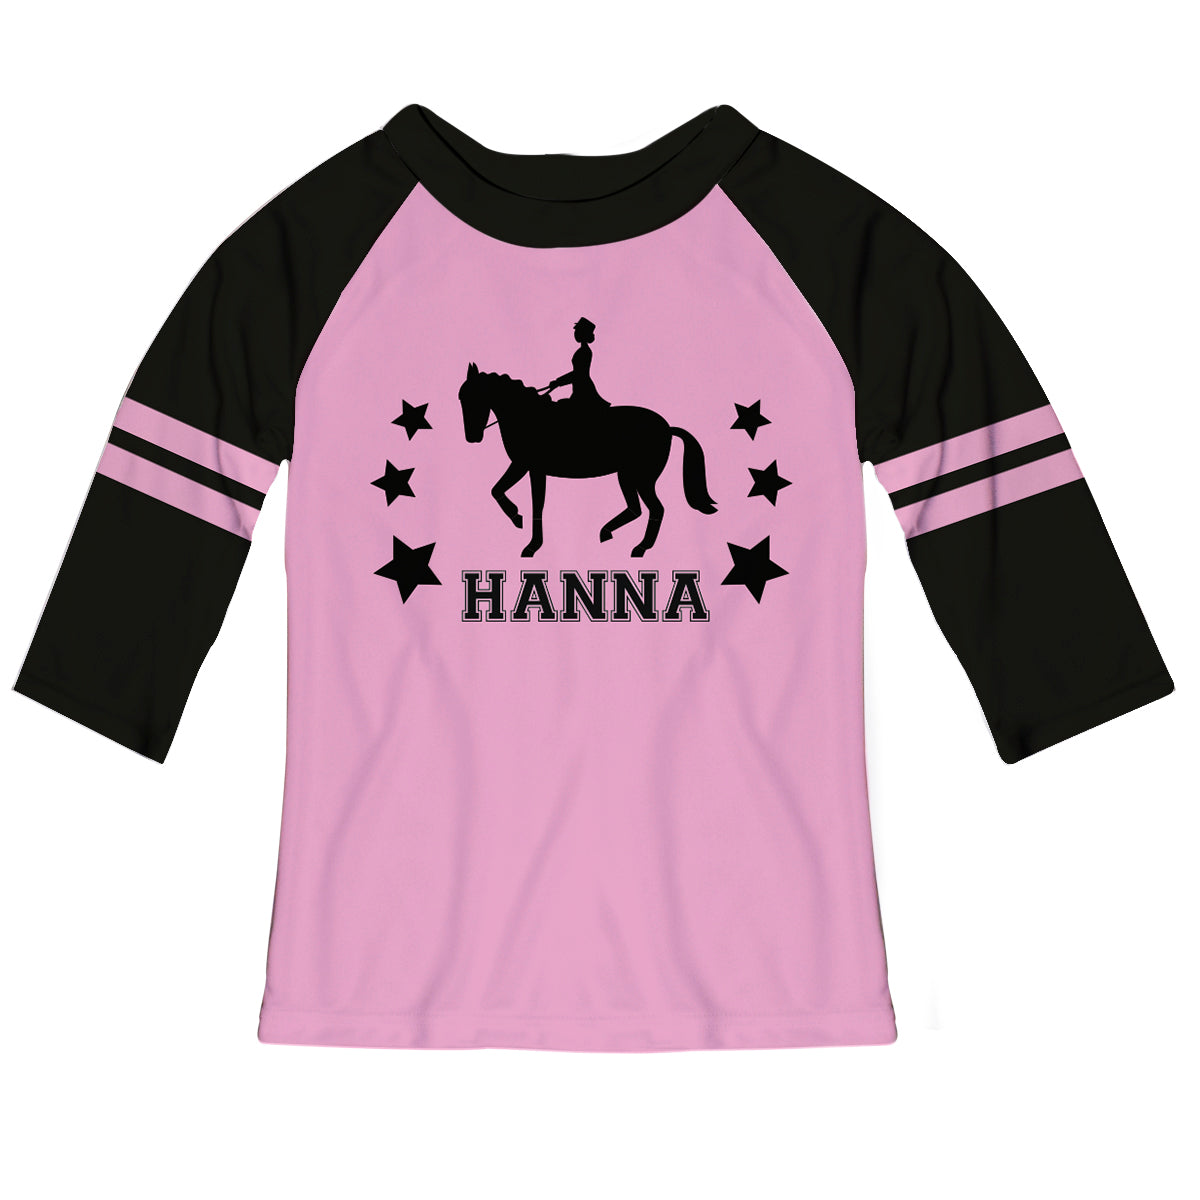 Cowgirl Personalized Name Pink and Black Raglan Tee Shirt 3/4 Sleeve - Wimziy&Co.